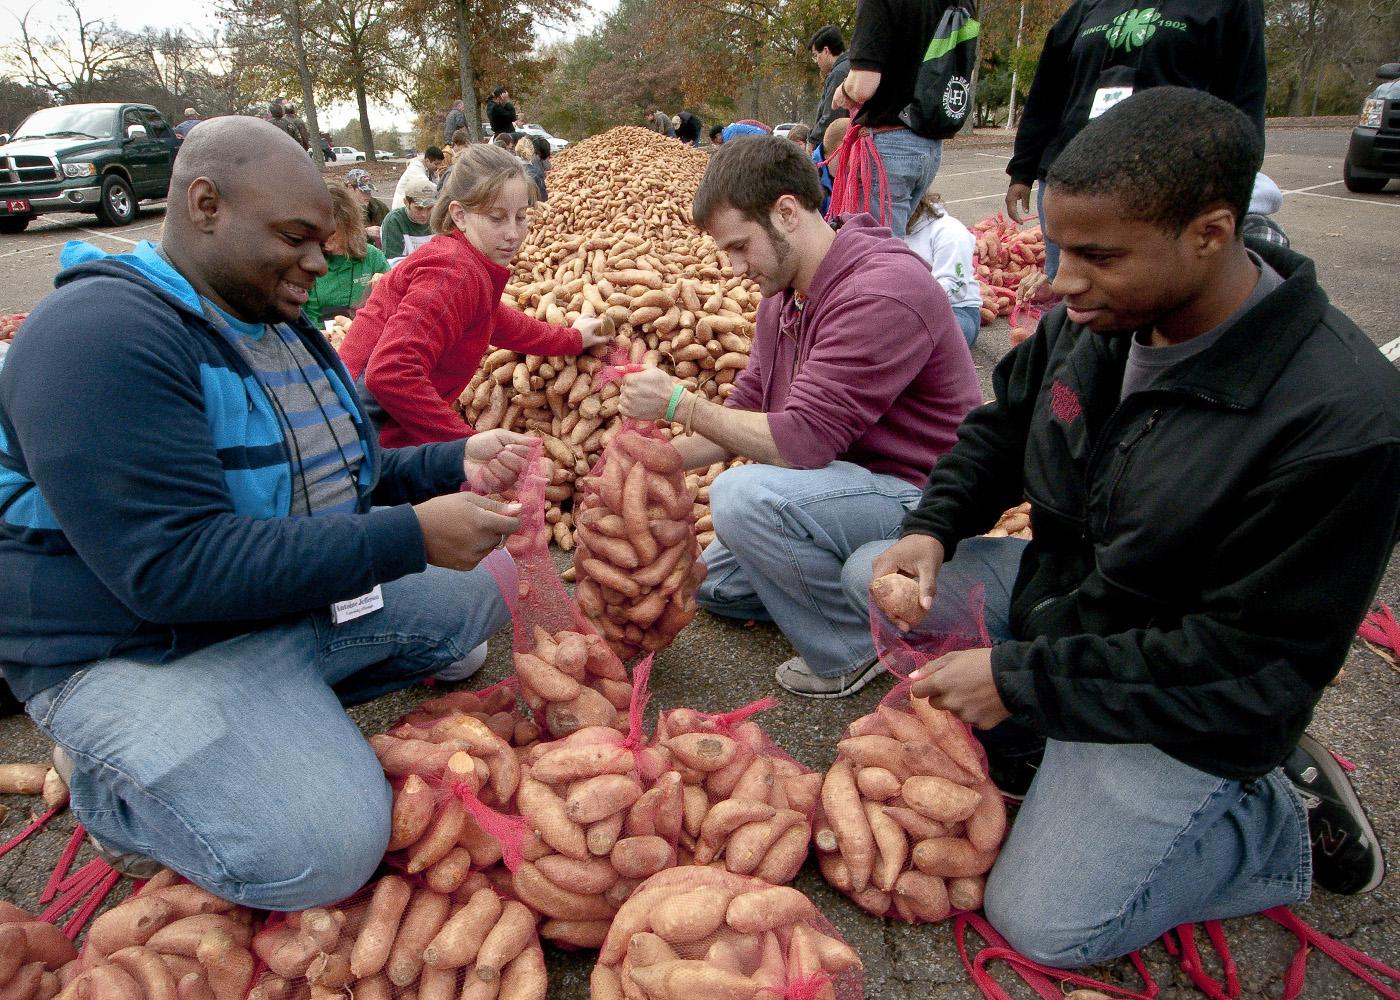 Bagging sweet potatoes as part of a service project at the annual meeting of southeastern Collegiate 4-H chapters at Mississippi State University are, from left, Antoine Jefferson, of the University of Georgia, Melanie Skaggs of Oklahoma State University, Sam Zarovy of Georgia Institute of Technology and Jonathan Jackson of Mississippi State University. (Photo by Scott Corey)